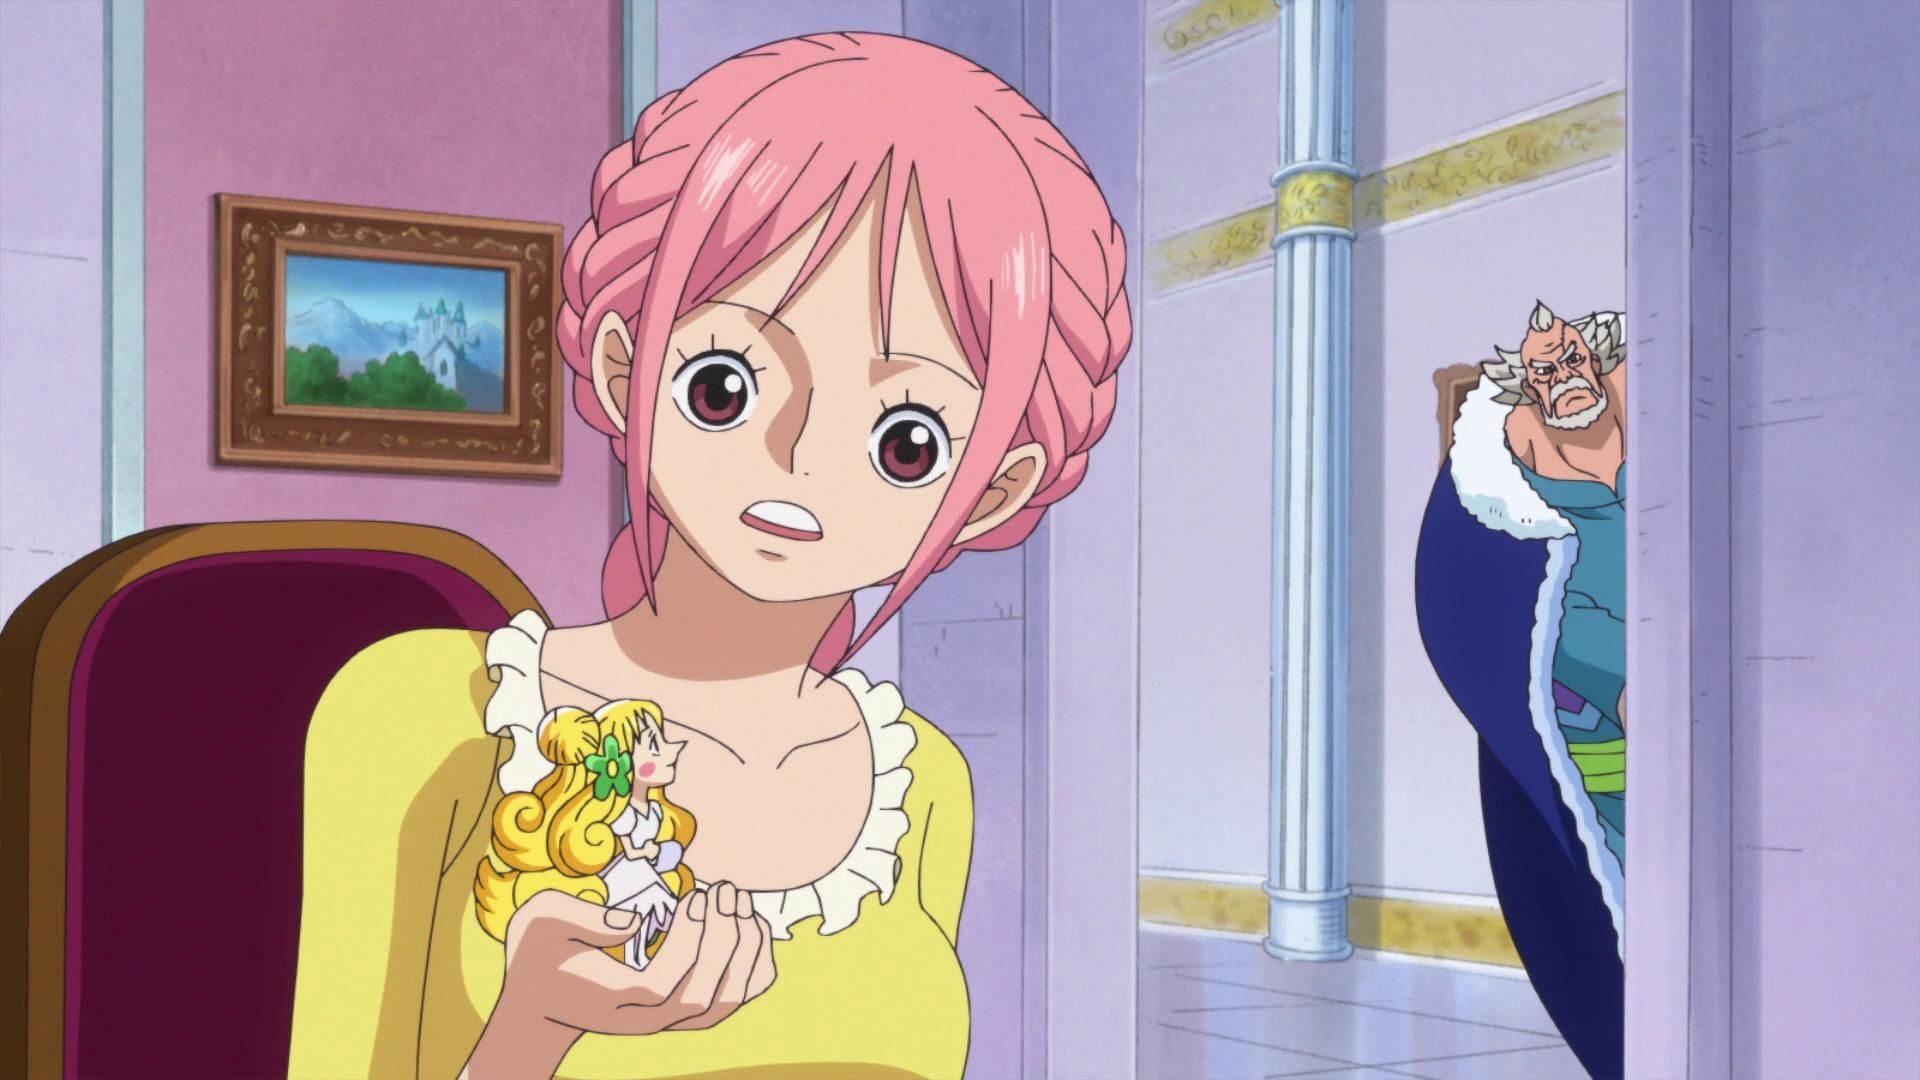 Rebecca from the One Piece series (Image via Toei Animation)